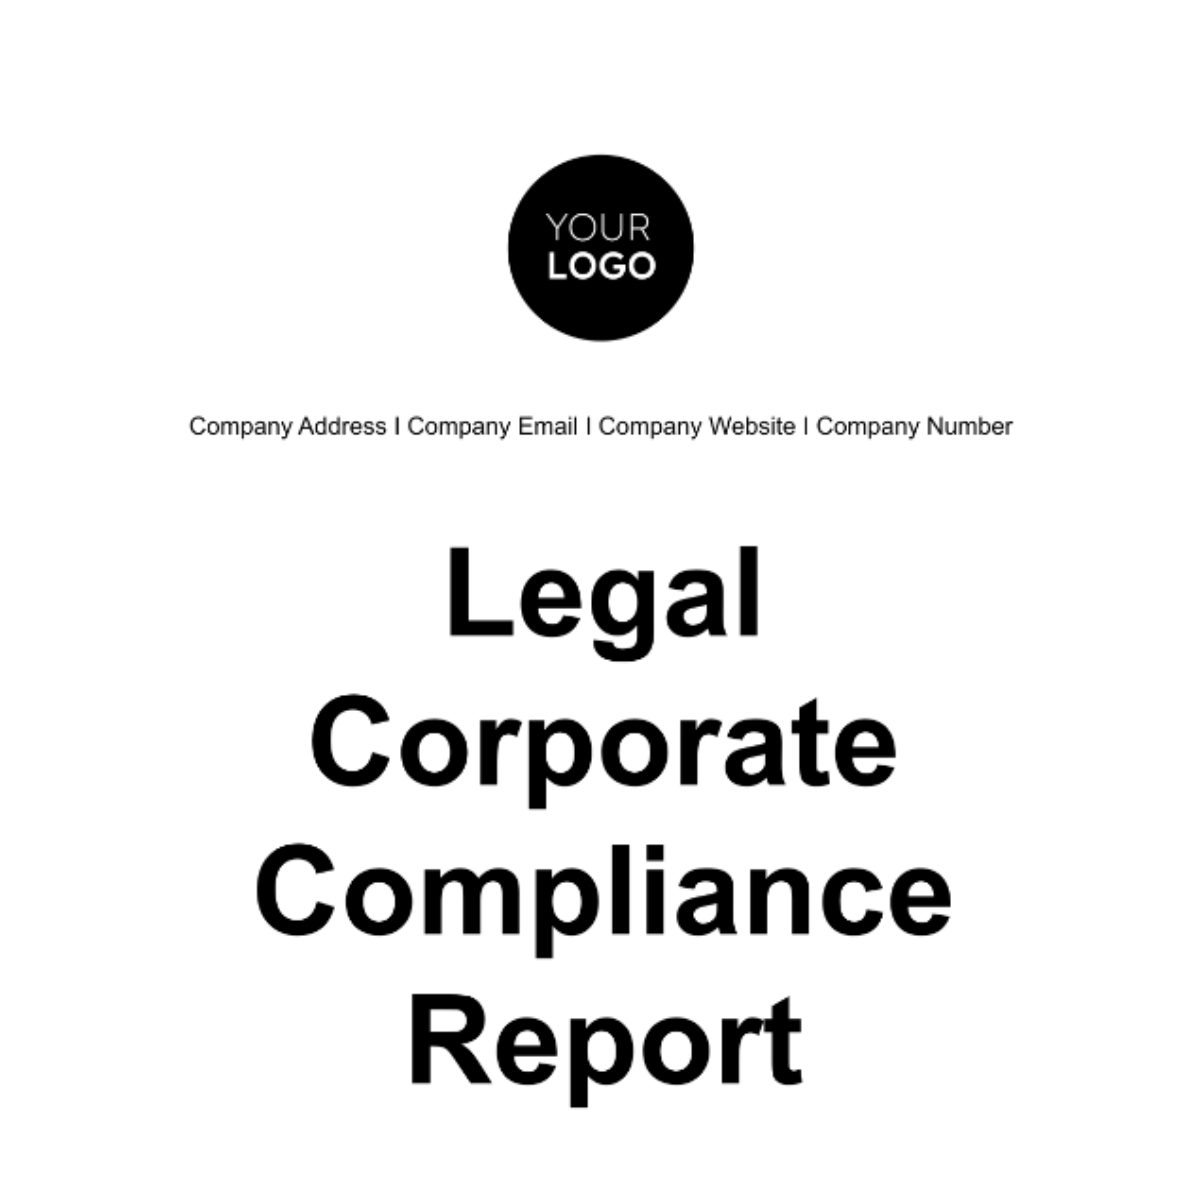 Free Legal Corporate Compliance Report Template